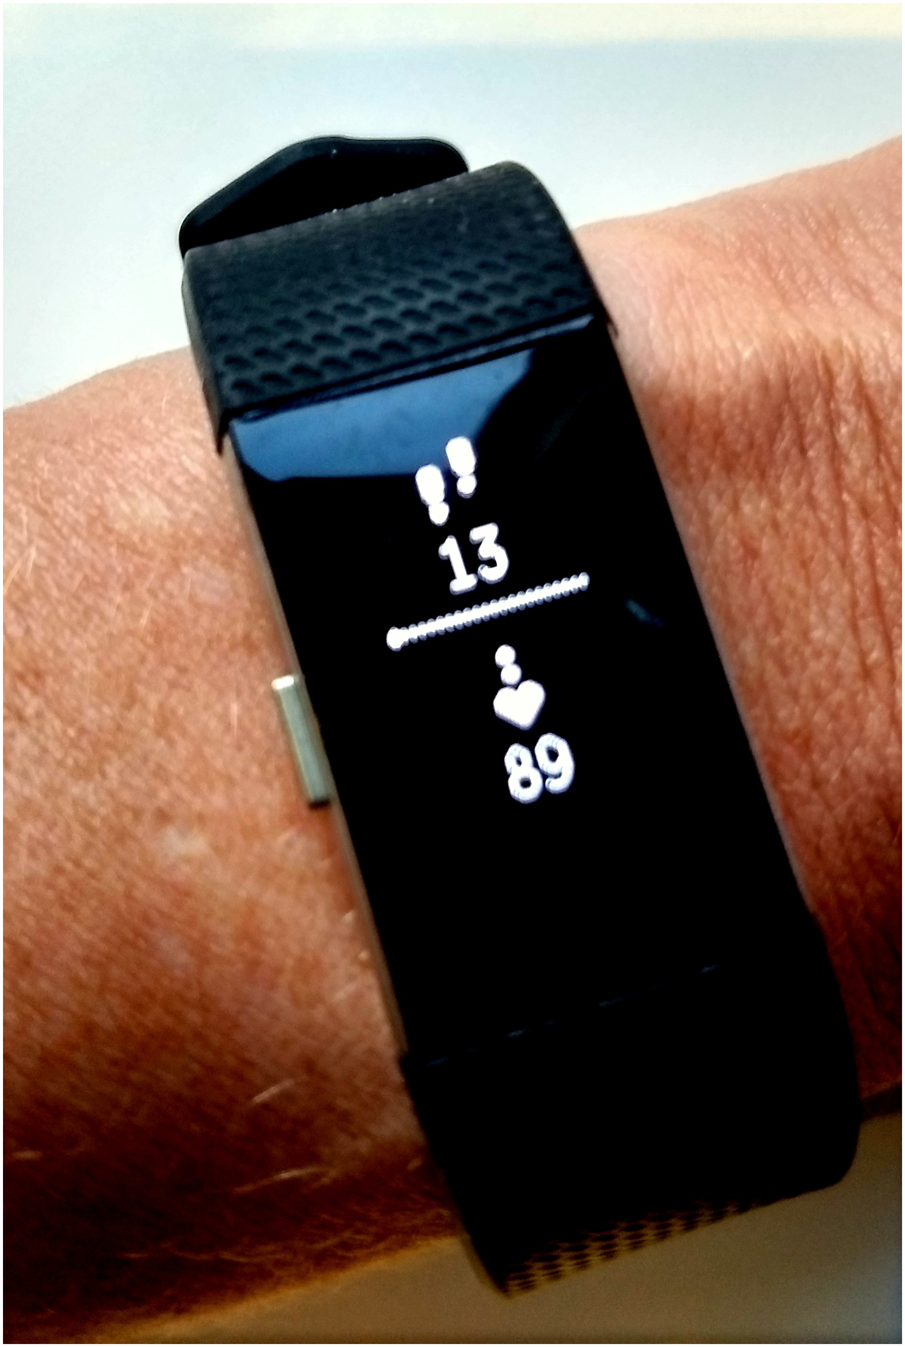 sum gateway riffel Is Fitbit Charge 2 a feasible instrument to monitor daily physical activity  and handbike training in persons with spinal cord injury? A pilot study |  Spinal Cord Series and Cases